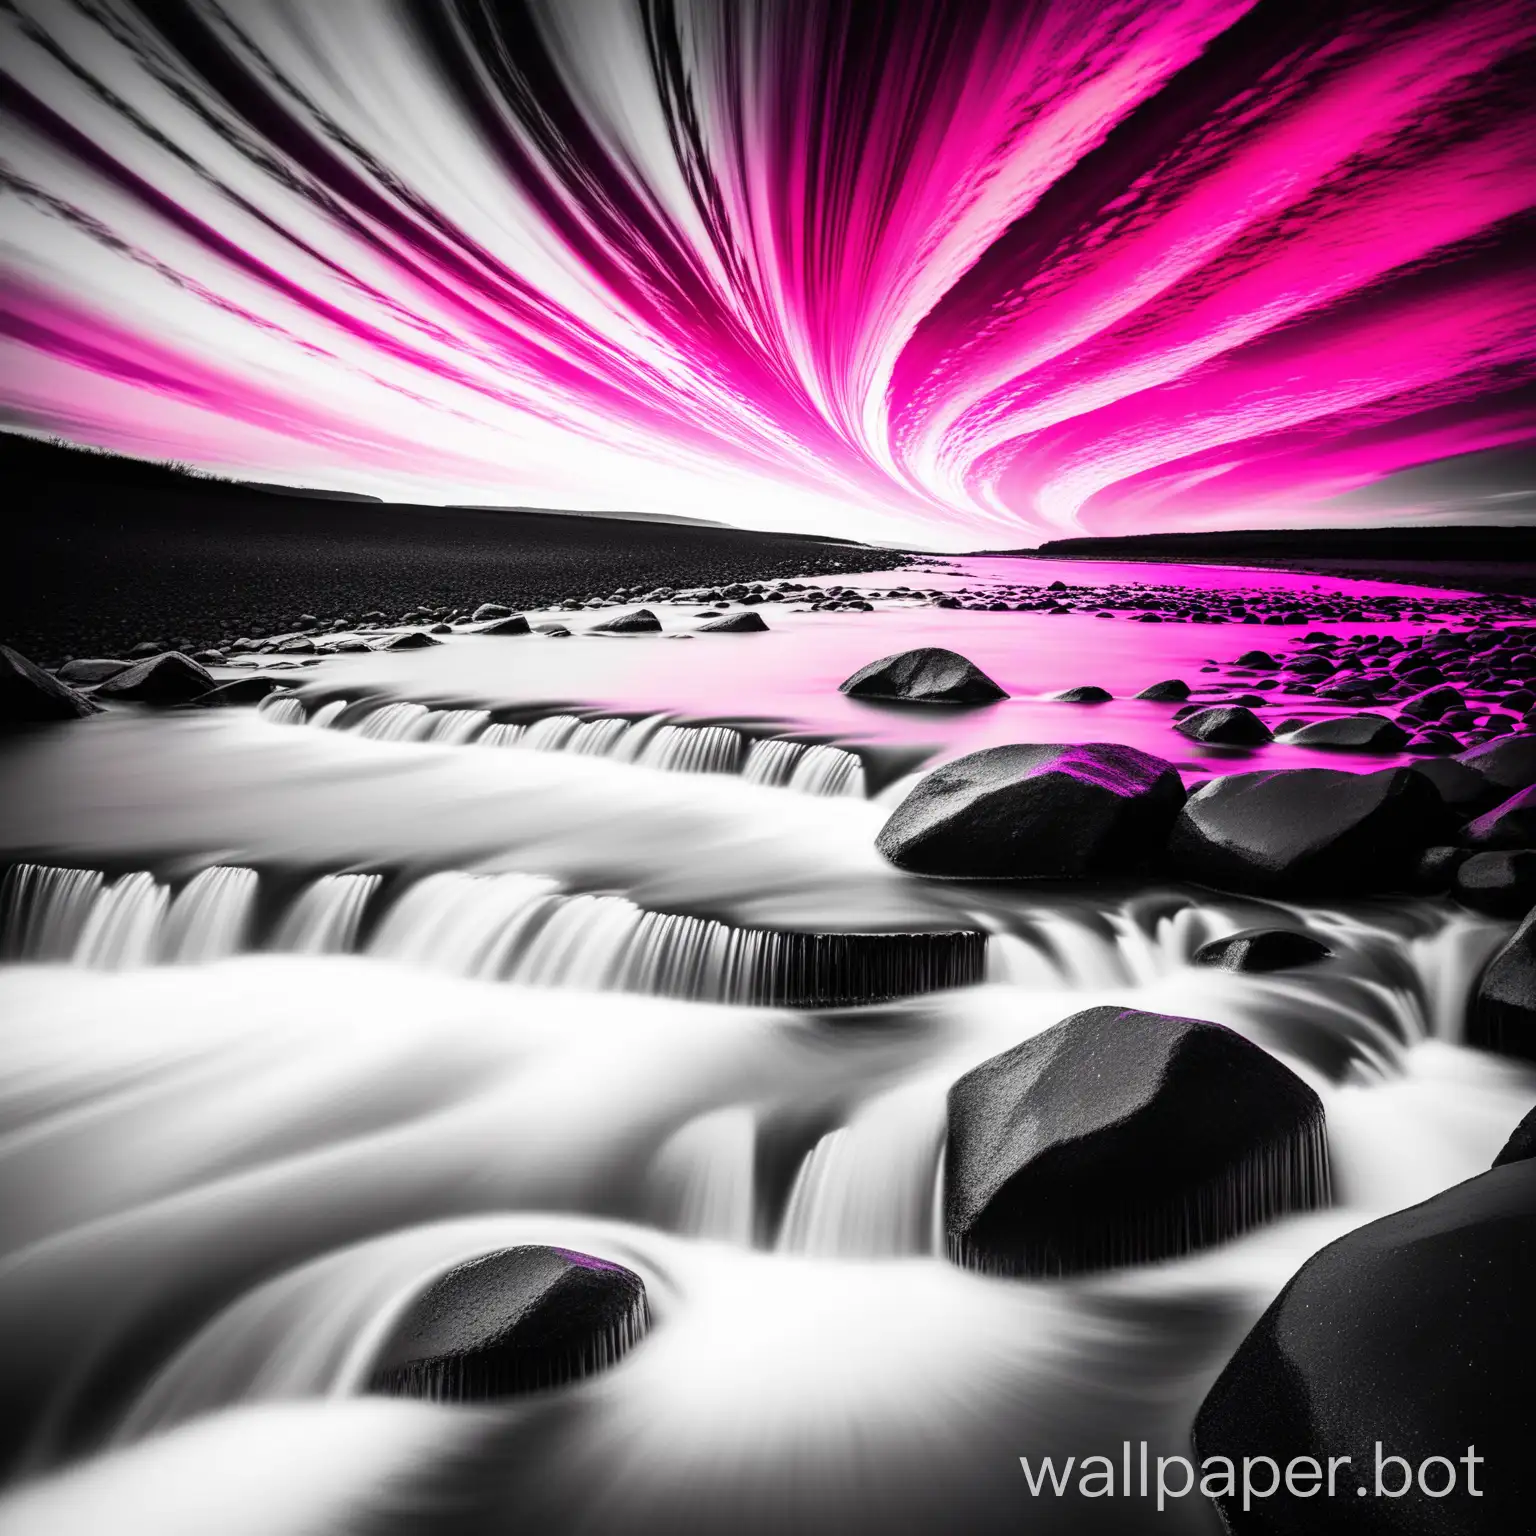 Flowing colors over a black and white scene